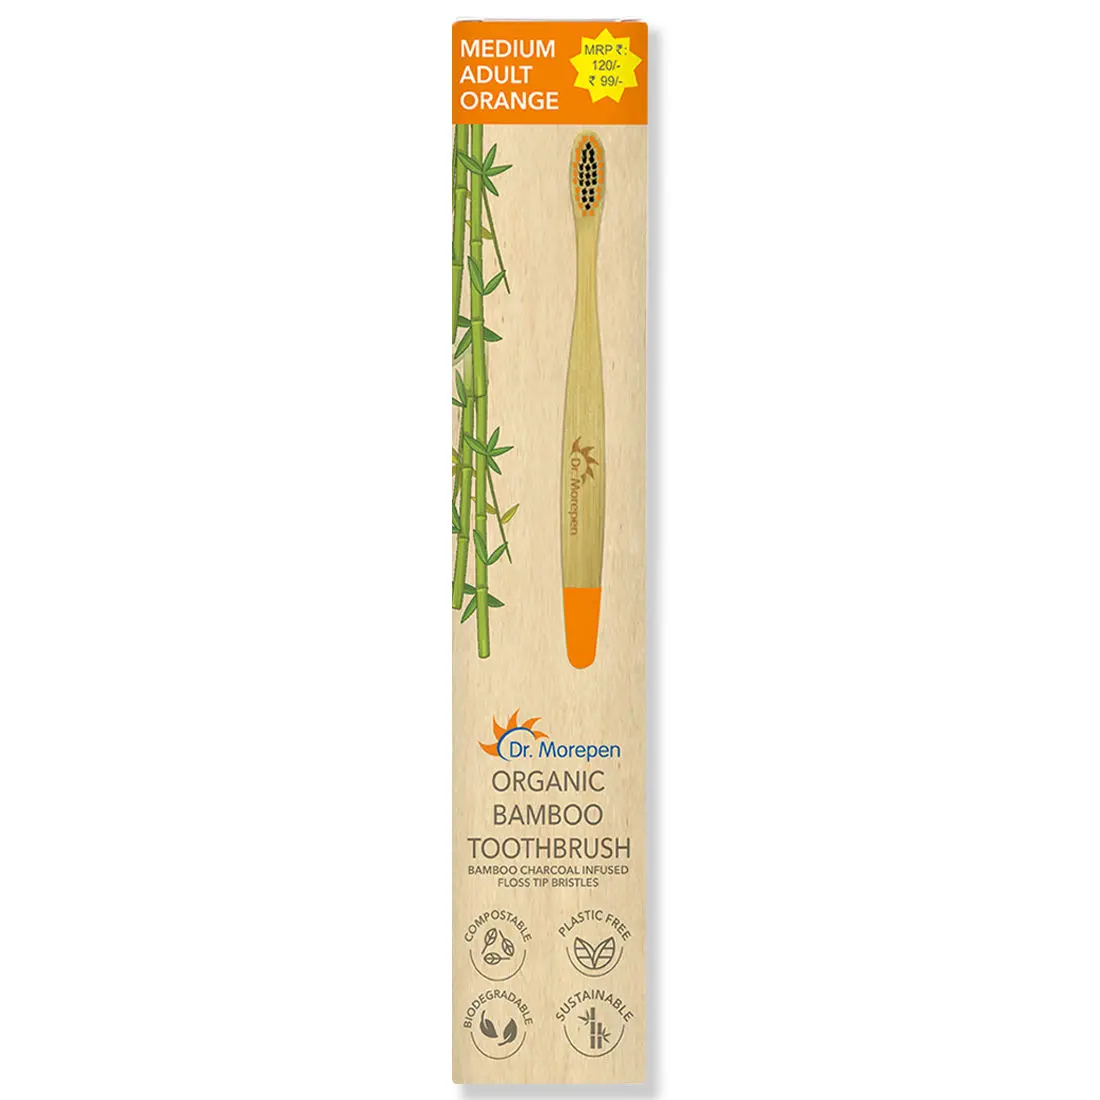 DR. MOREPEN Organic Bamboo Toothbrush For Adults - Orange